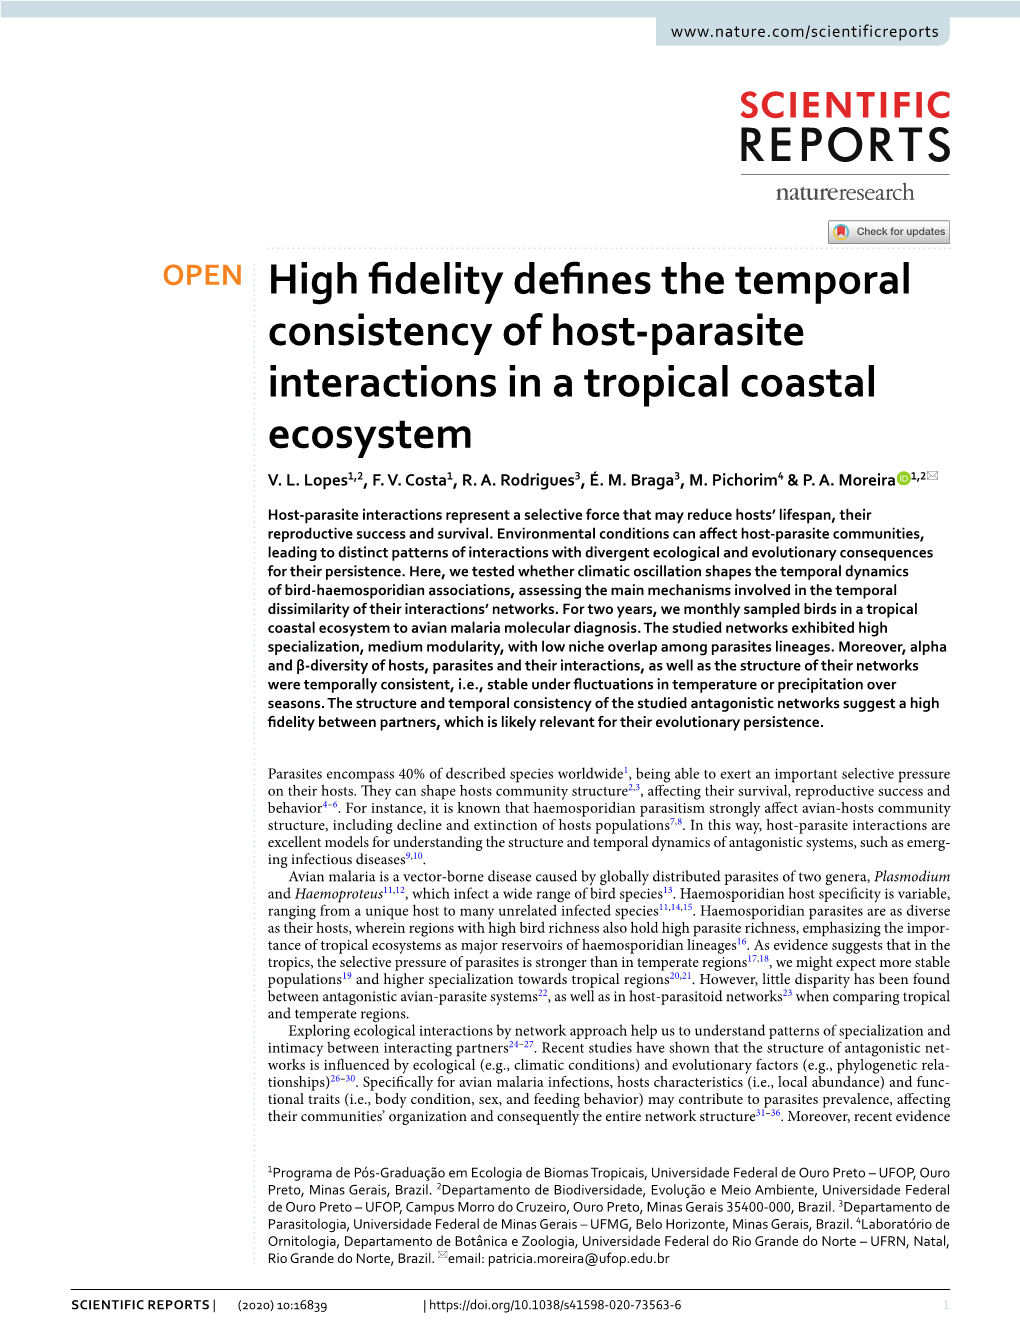 High Fidelity Defines the Temporal Consistency of Host-Parasite